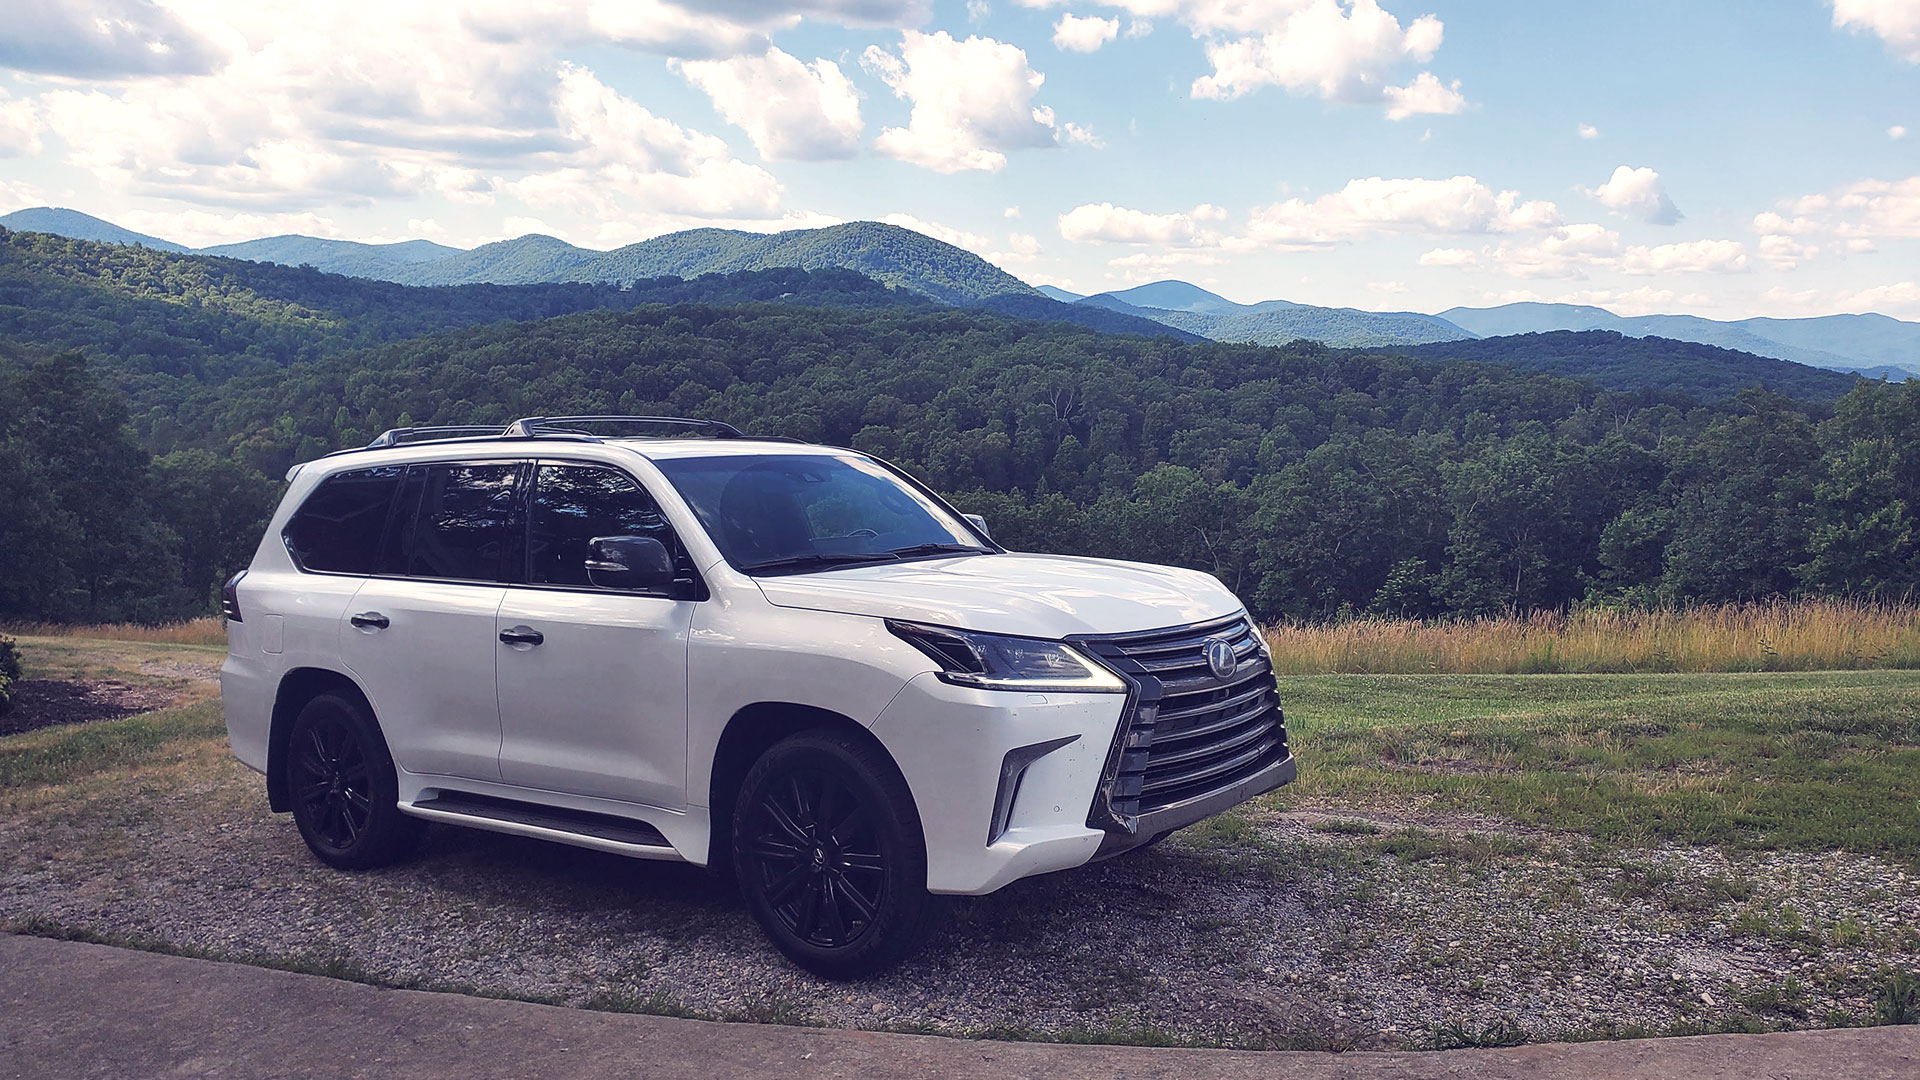 Driving The 2021 Lexus LX 570: Our Thoughts